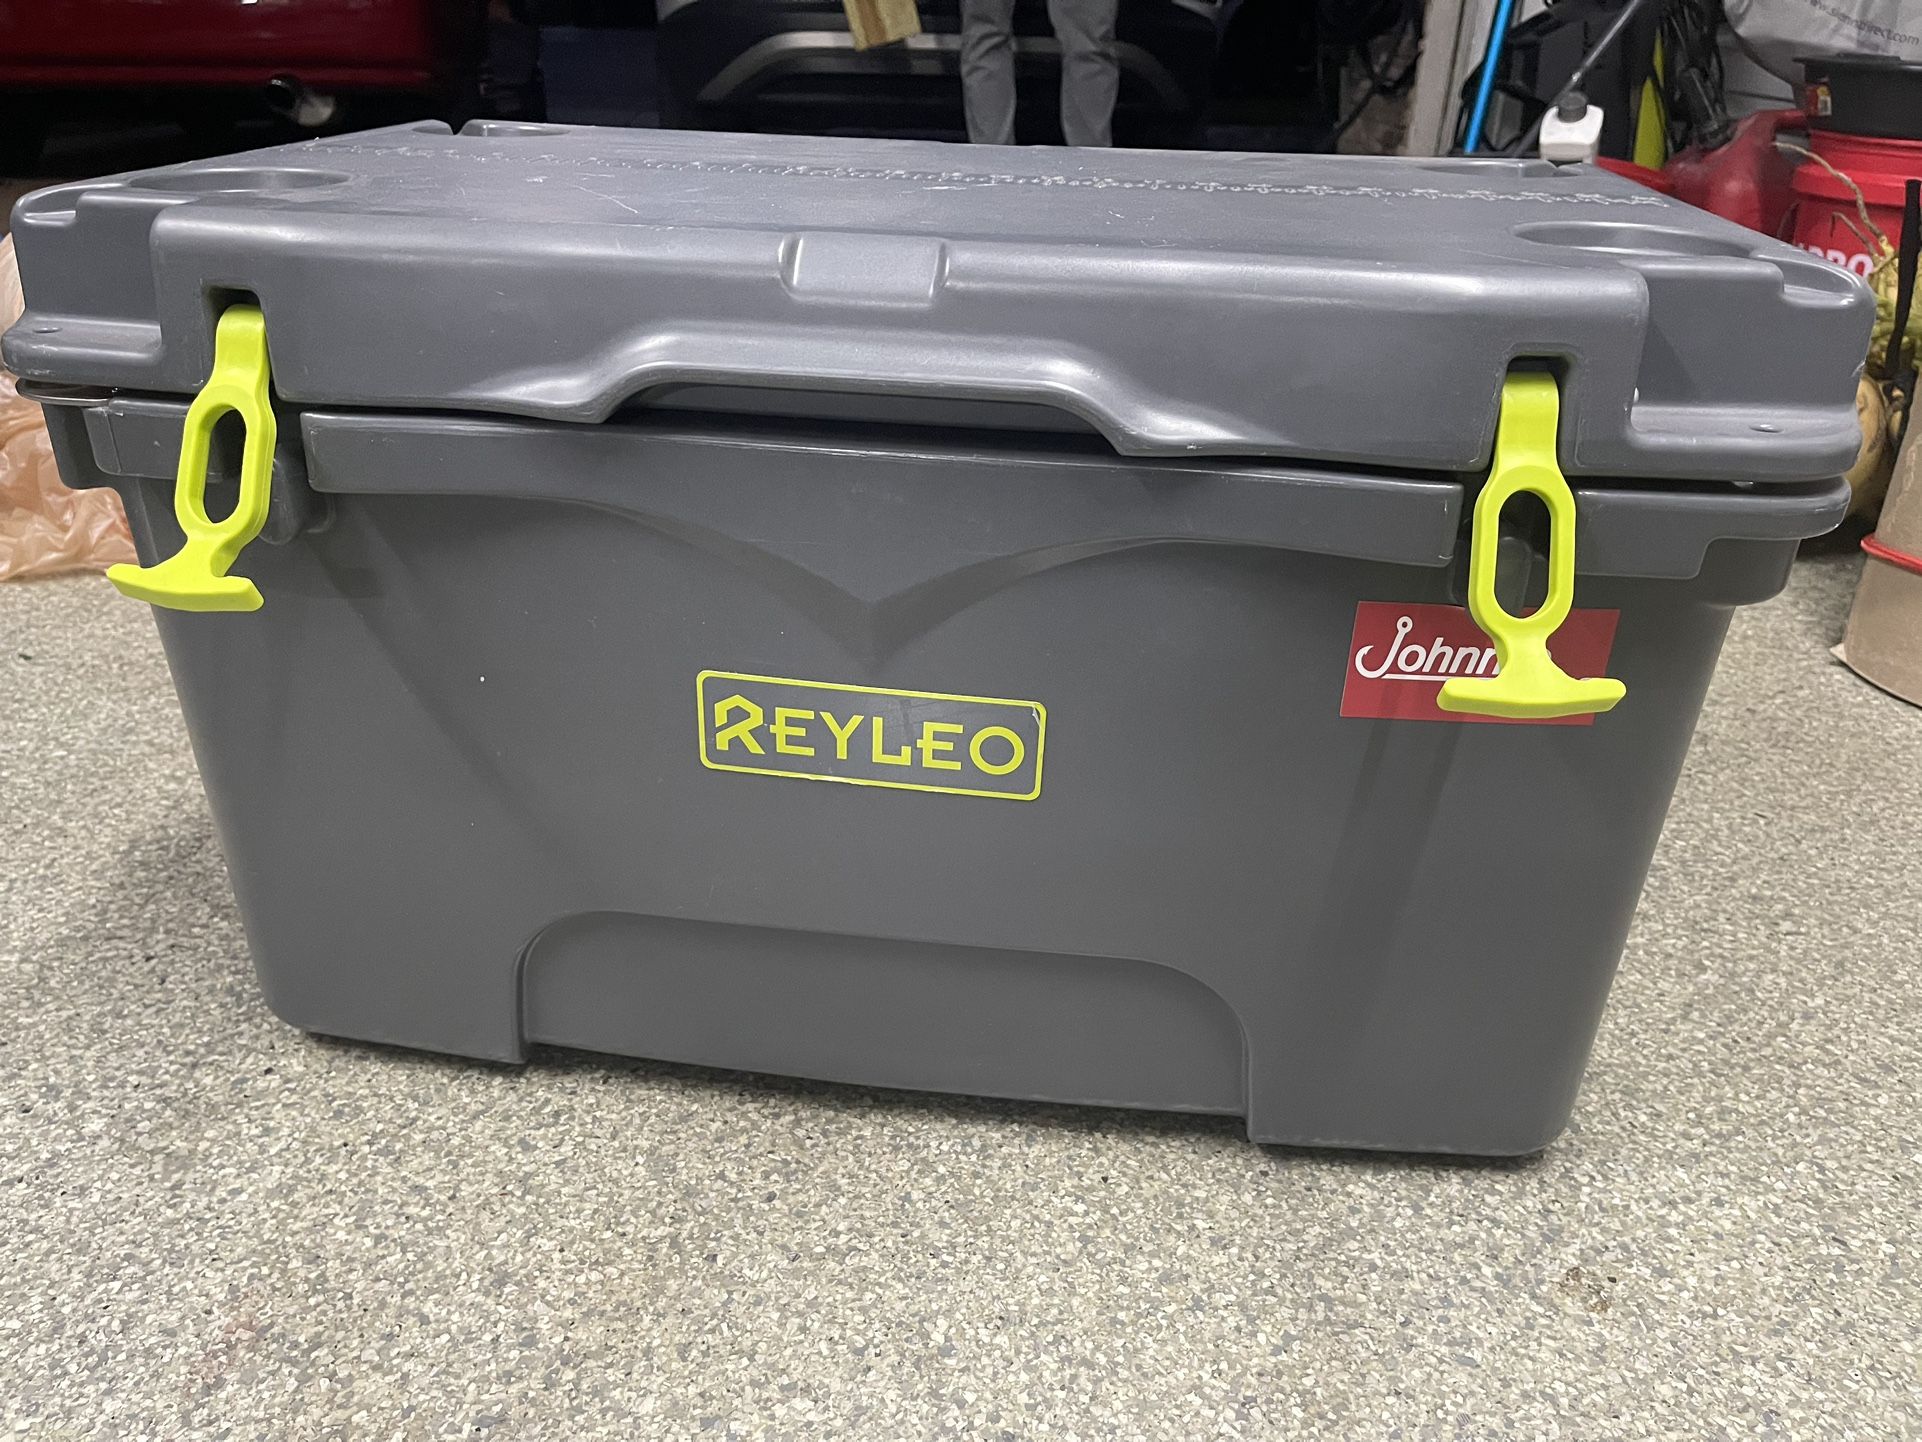 REYLEO 52 QUART PORTABLE ROTOMOLDED COOLER HEAVY-DUTY ICE CHEST WITH FISH RULER SPORTS OUTDOORS